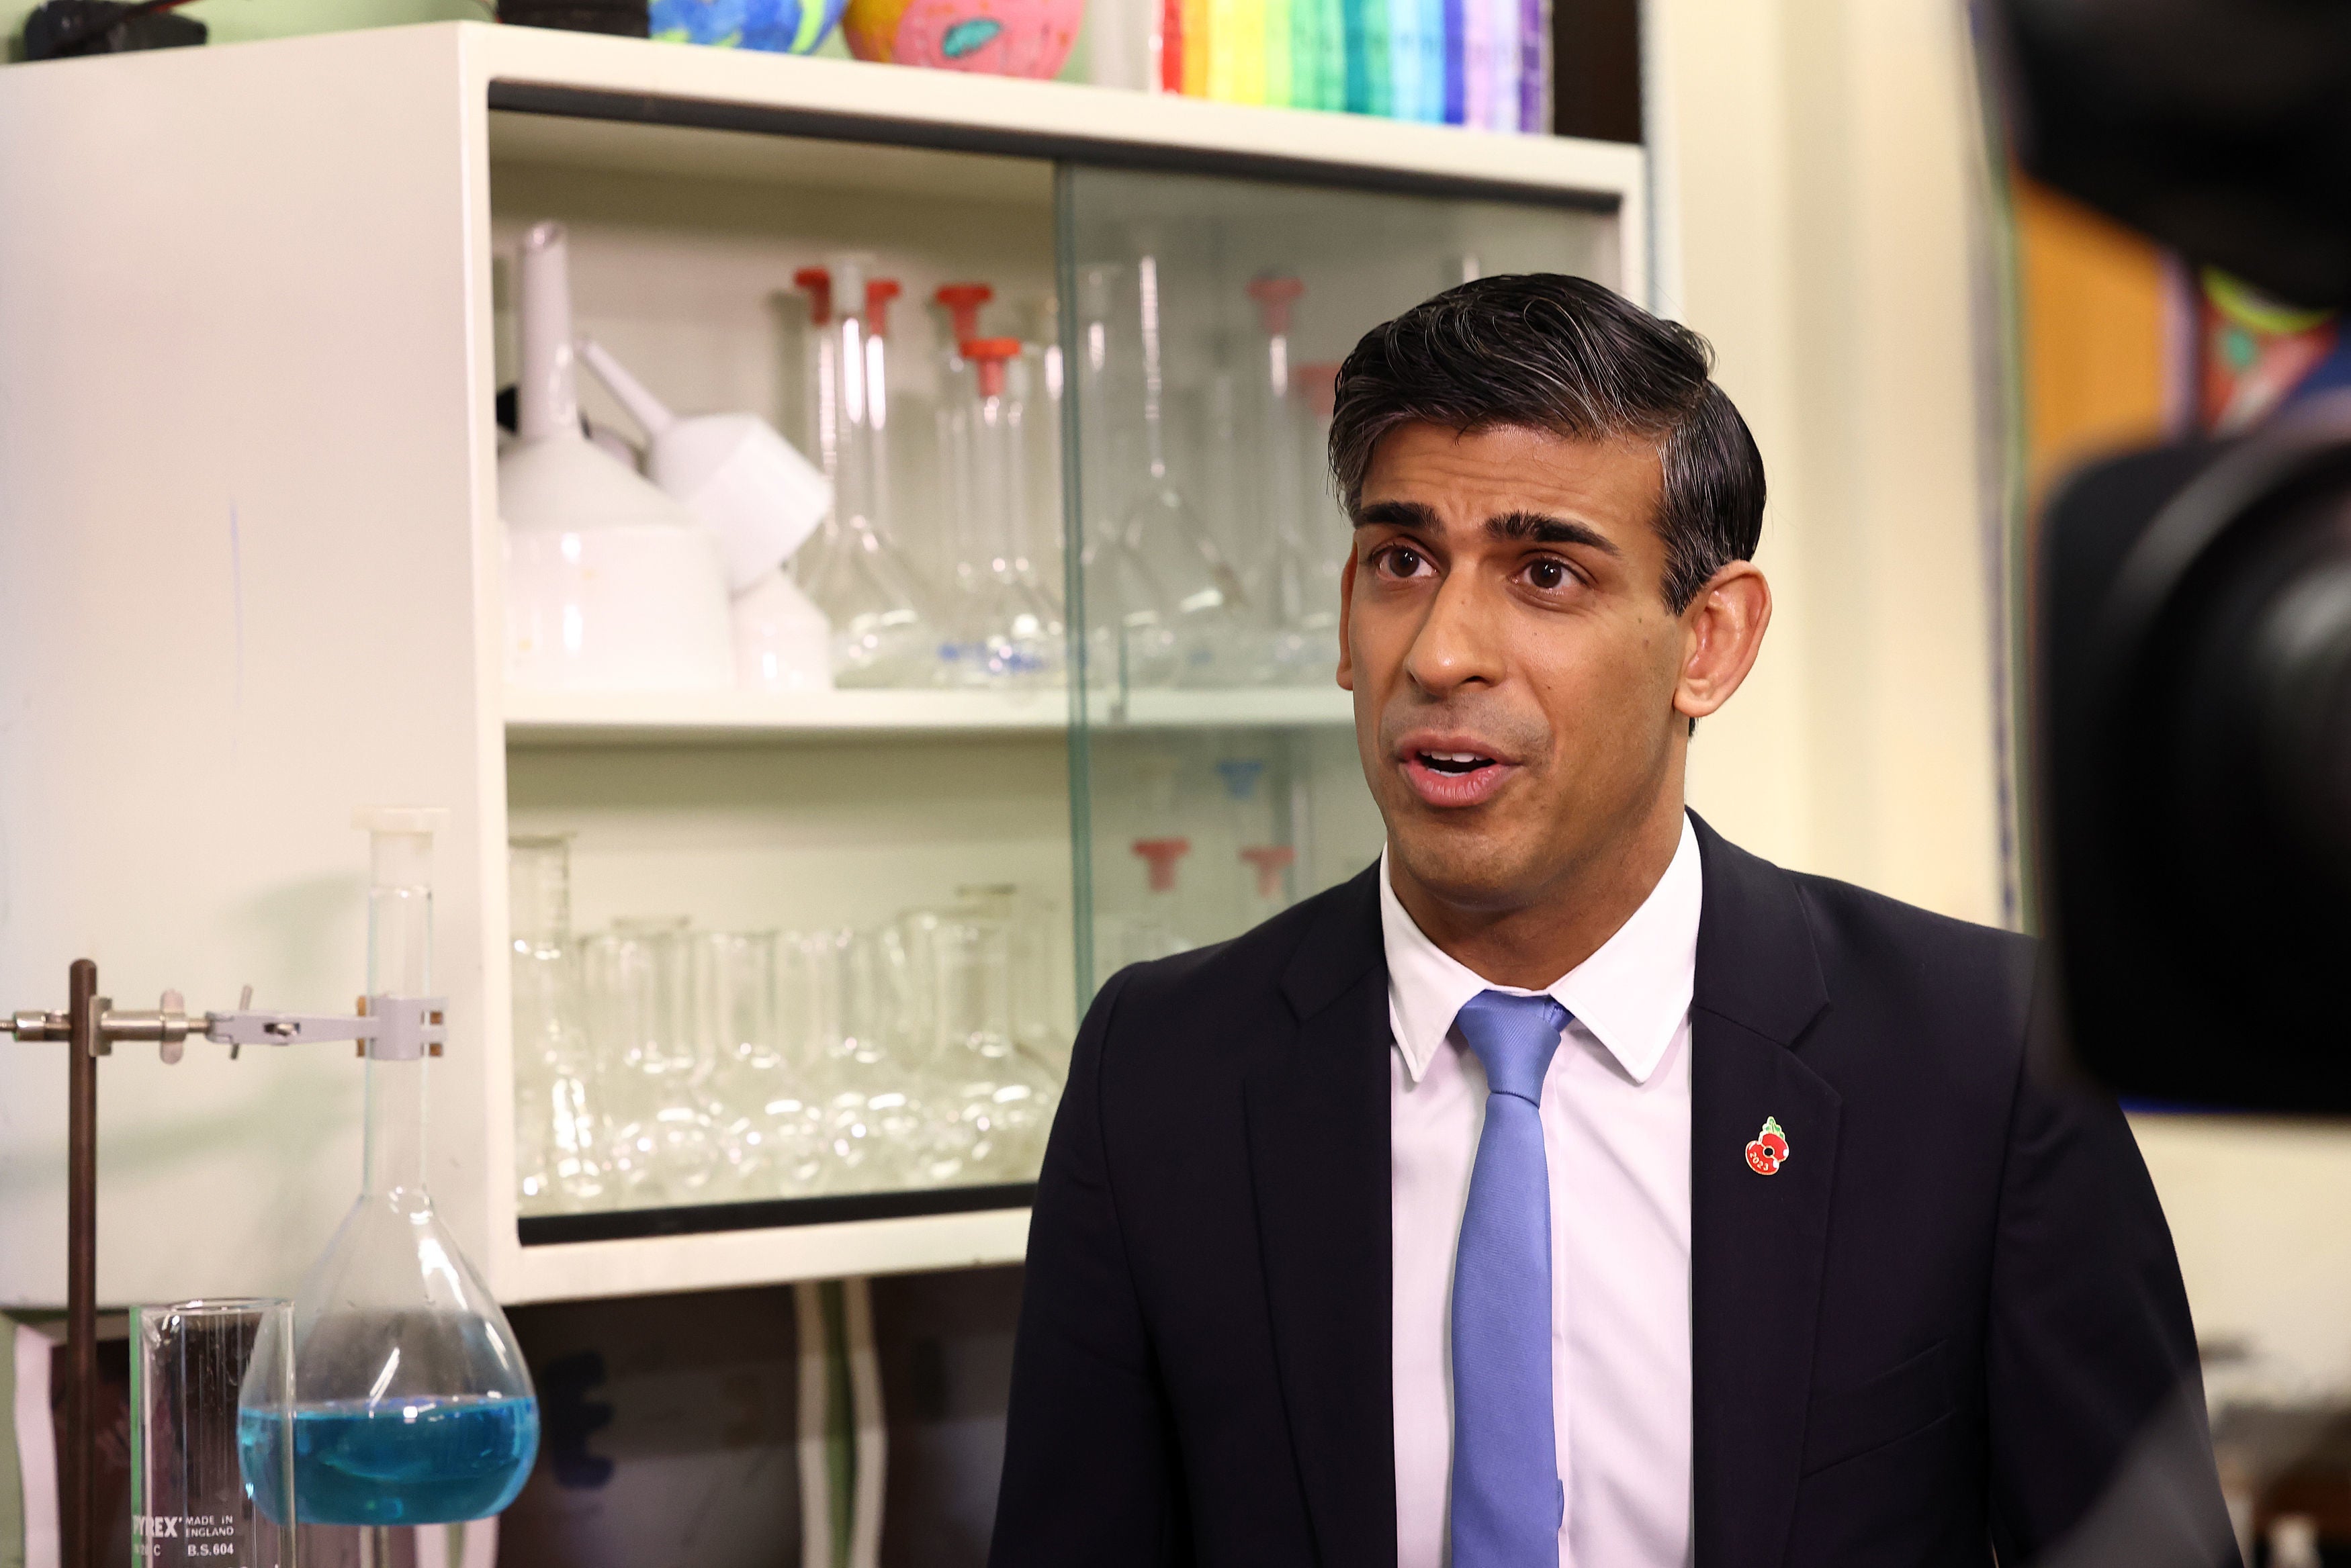 Rishi Sunak announced plans to cut smoking for the younger generation